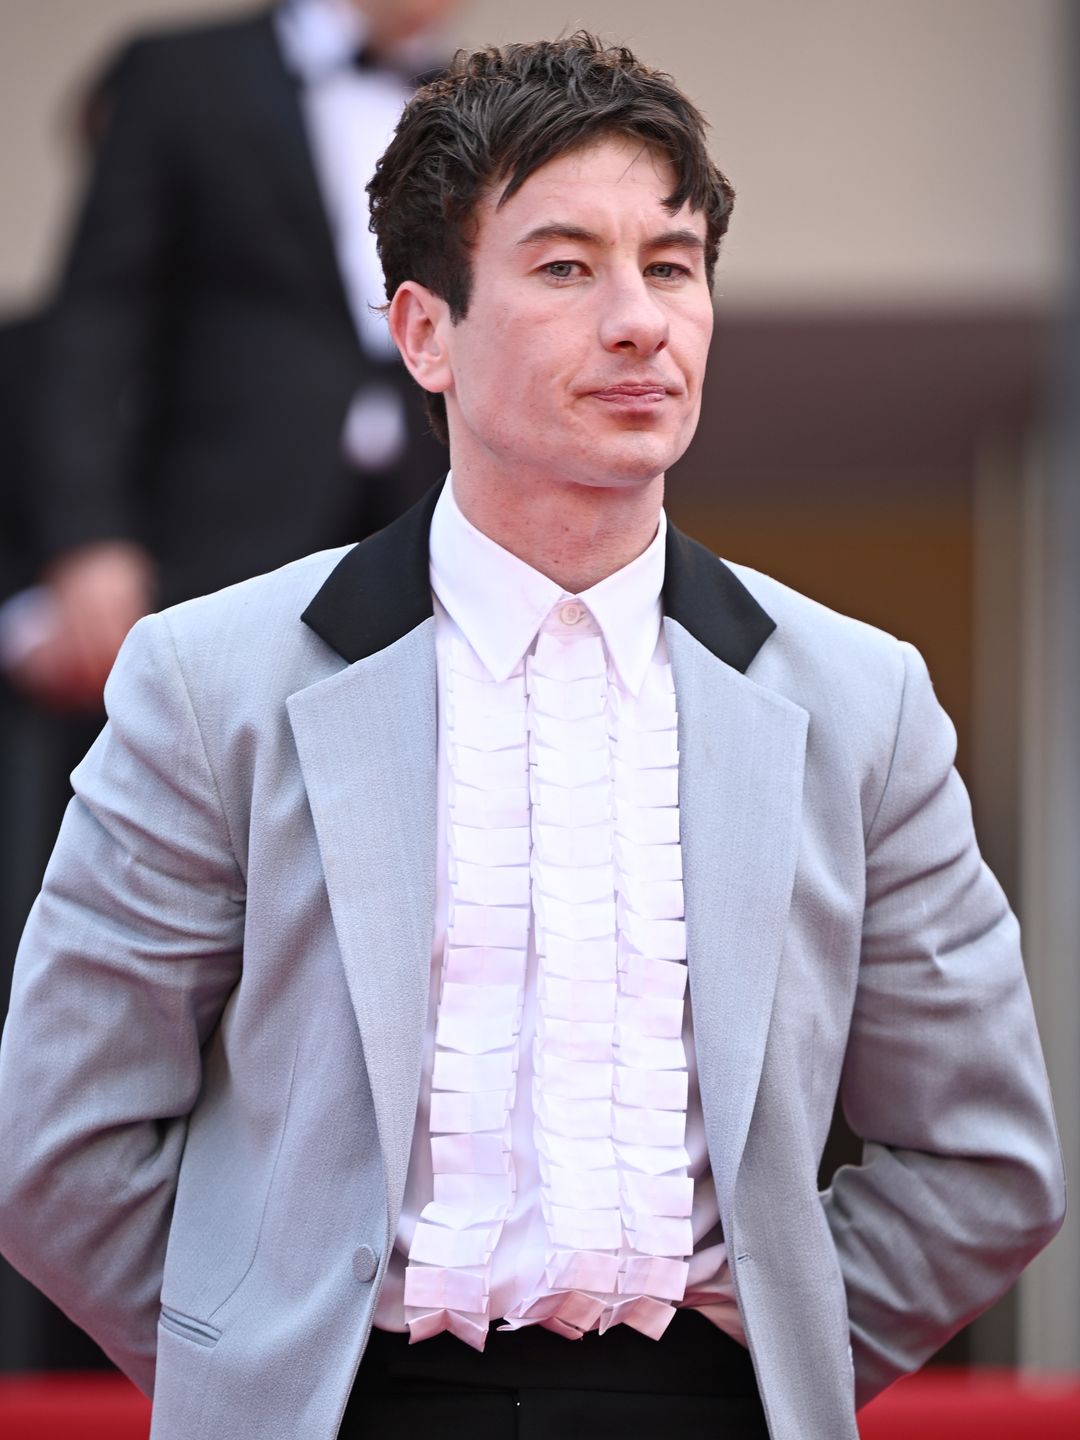 Barry Keoghan in a grey jacket and white shirt